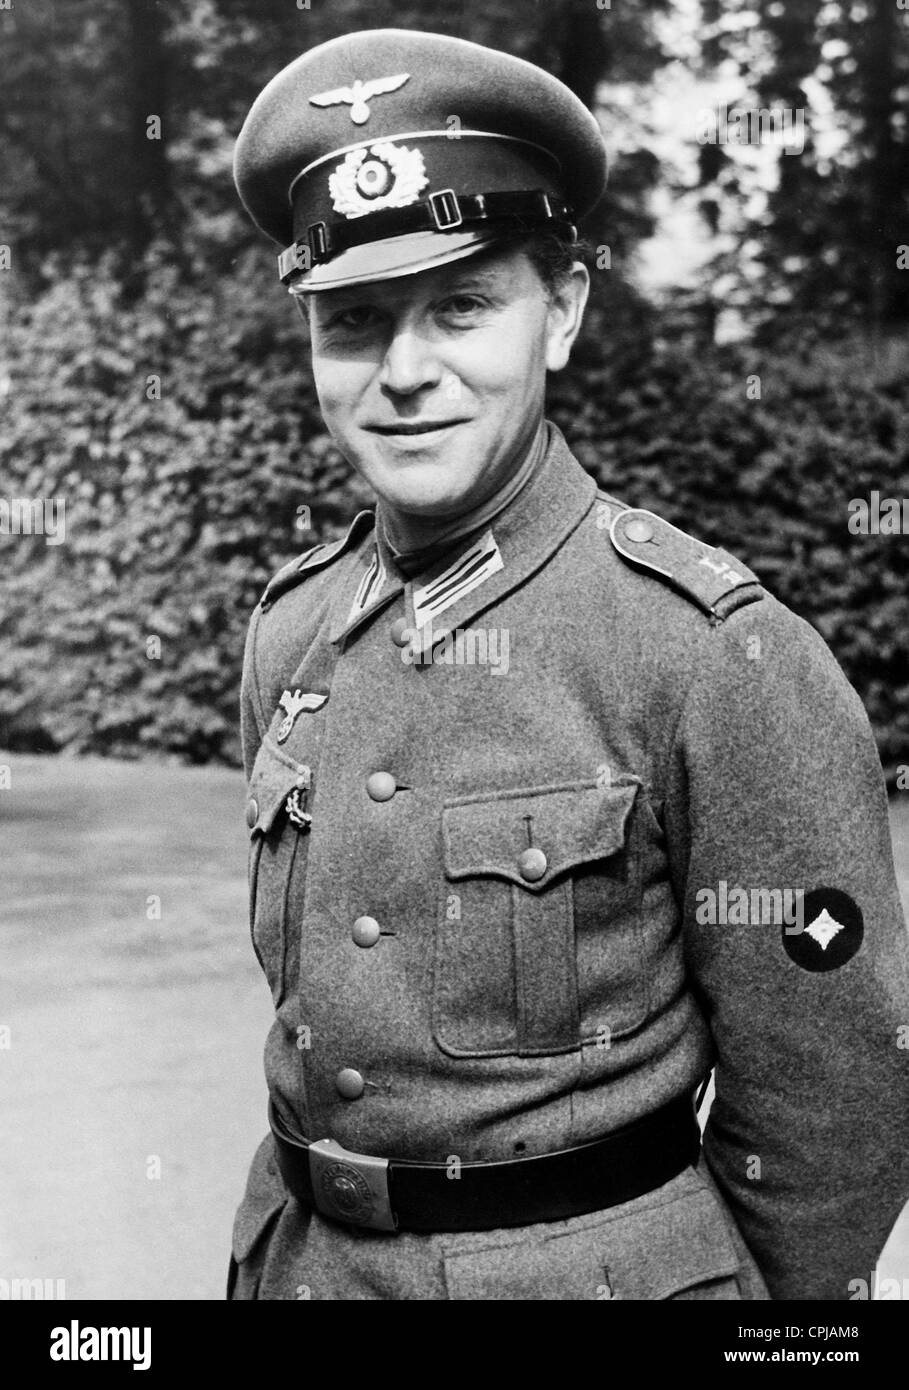 Gustav Froehlich as a soldier, 1942 Stock Photo